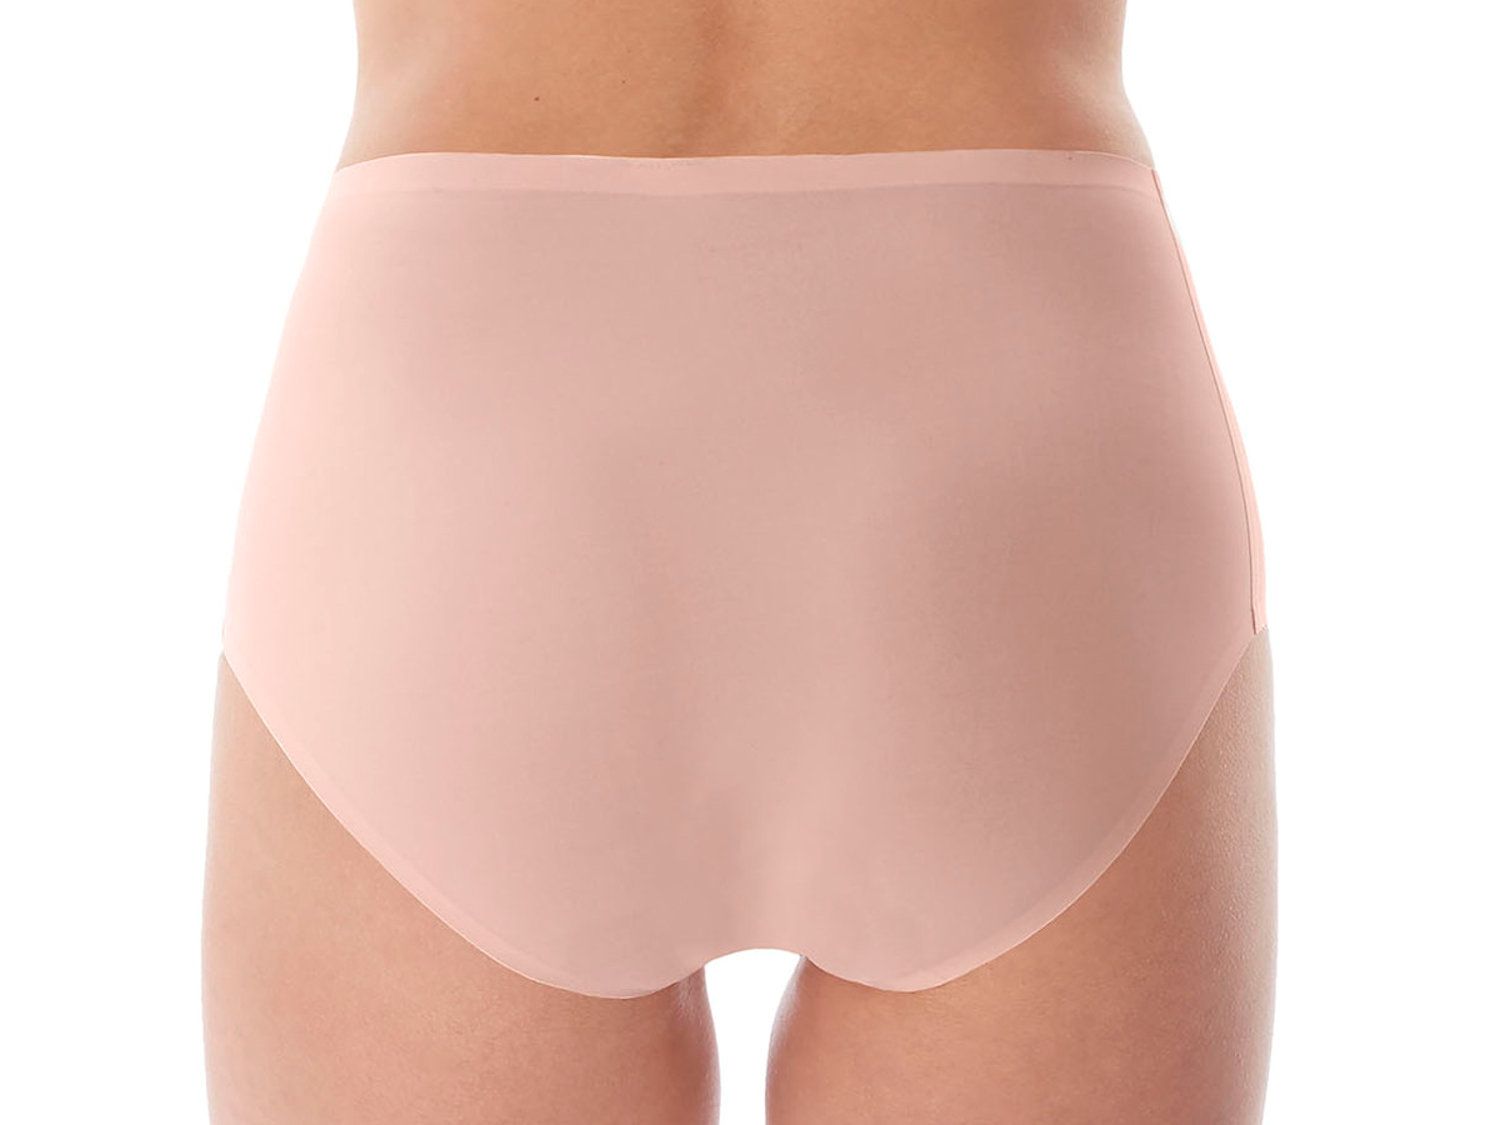 https://www.lumingerie.com/images/products/smoothease-fl2328-stretch-full-brief-blush-b_orig.jpg